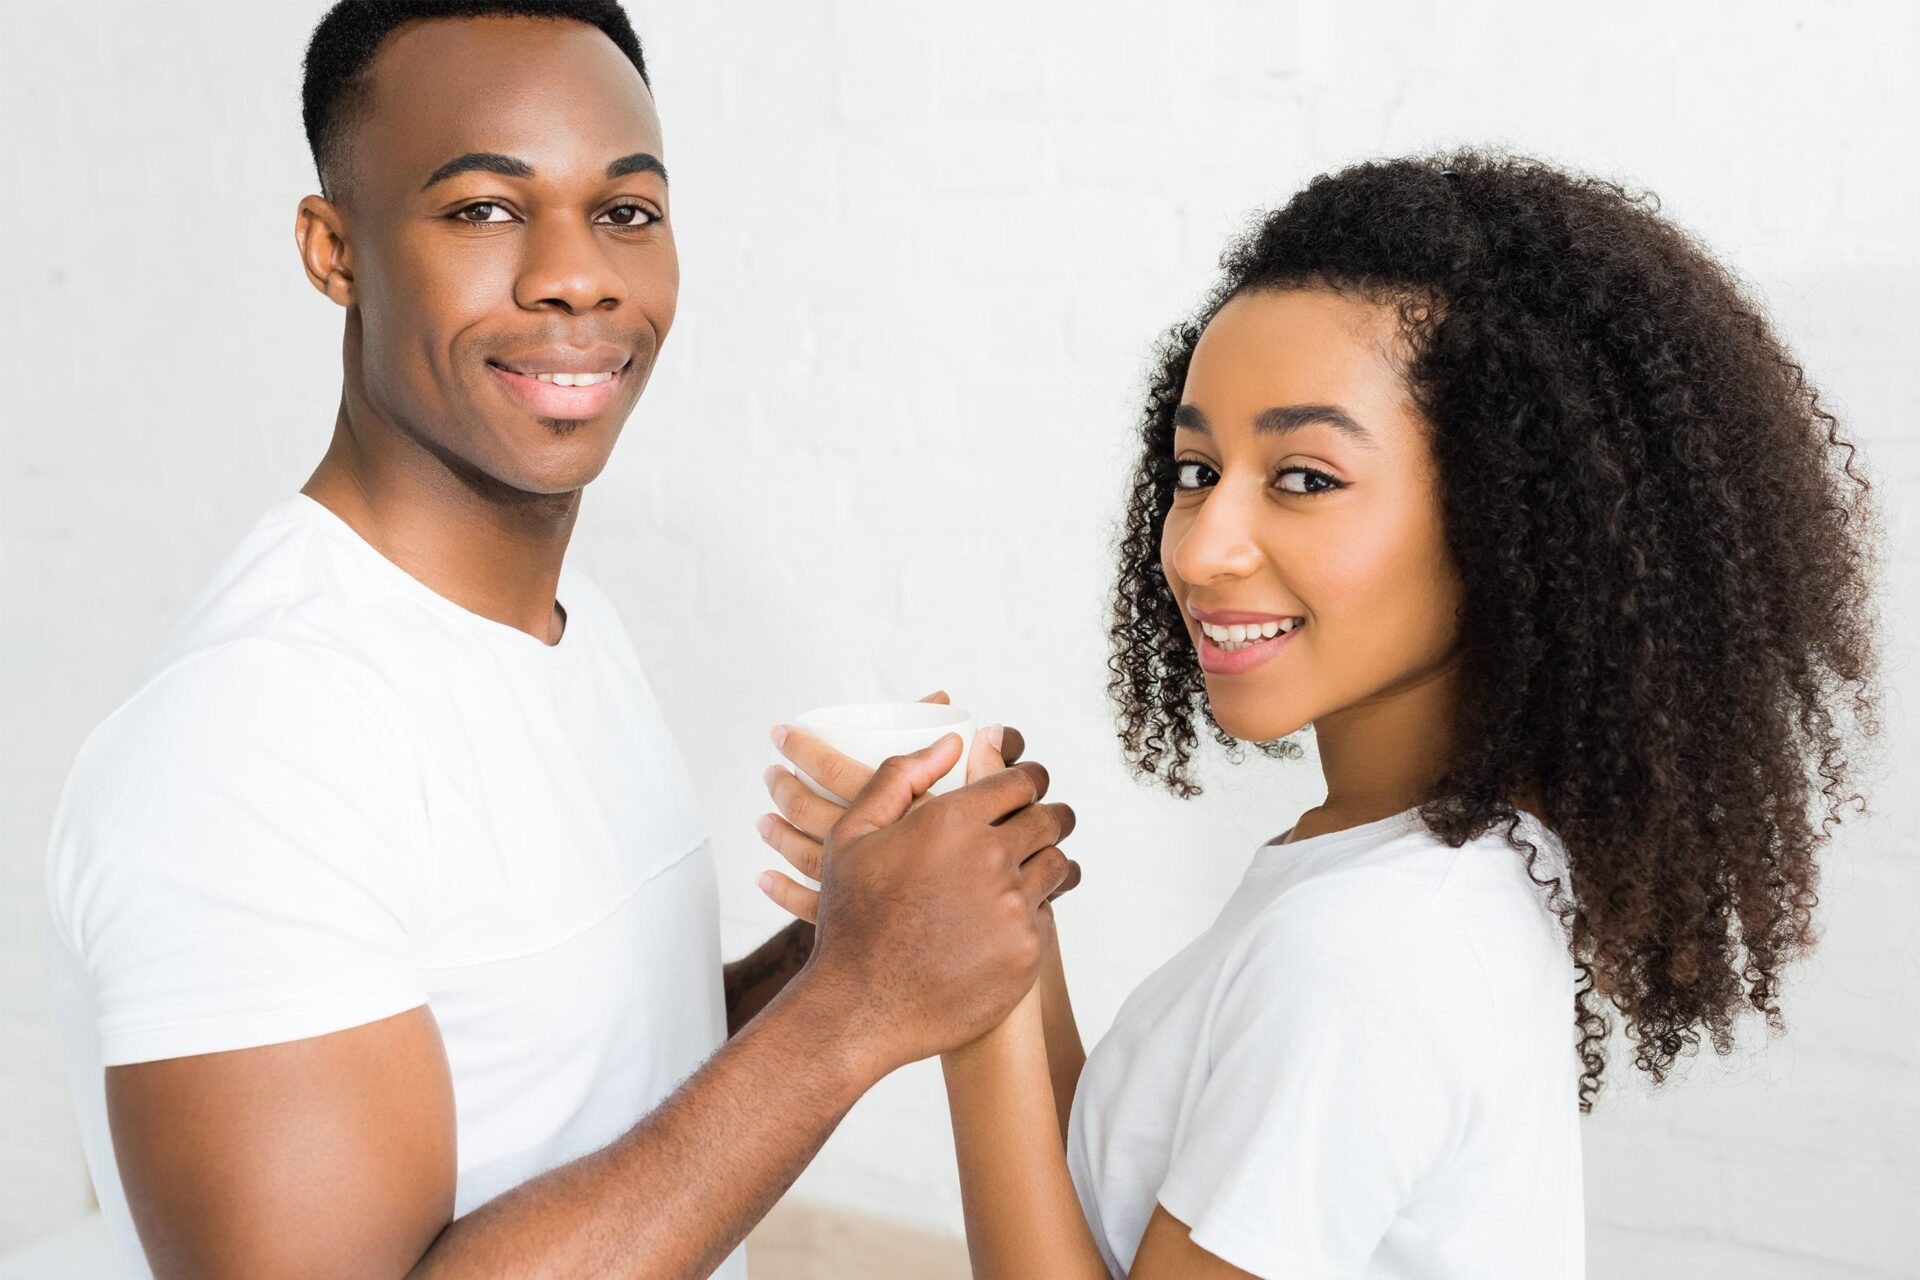 Trust Building Exercises for Couples